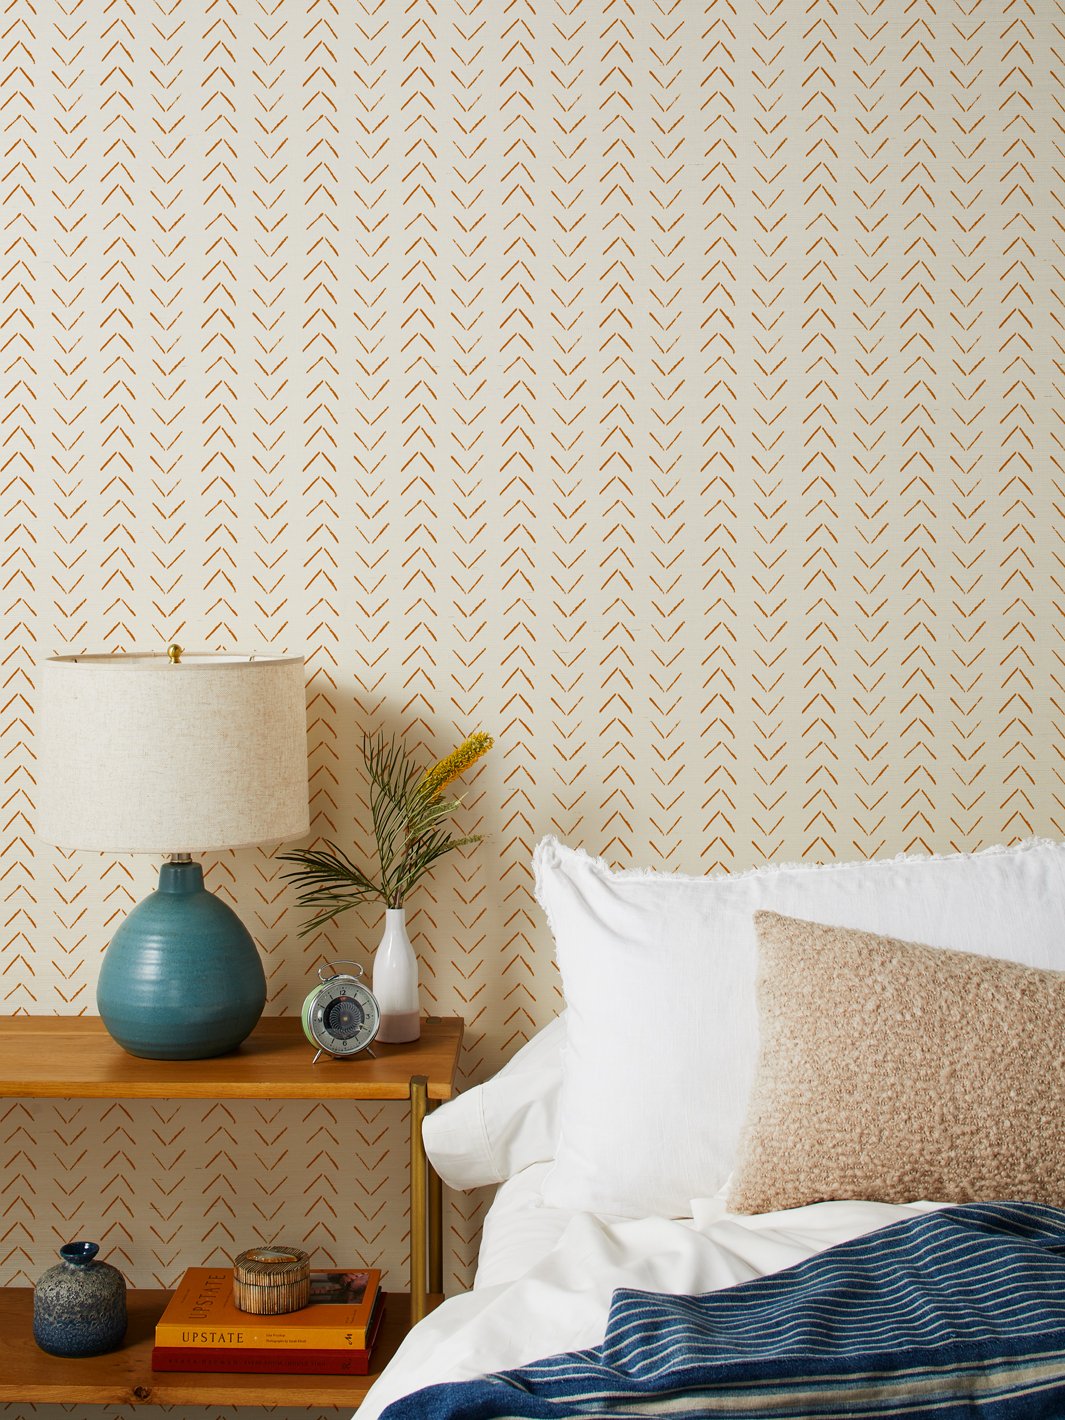 'Arrows' Grasscloth' Wallpaper by Nathan Turner - Terracotta